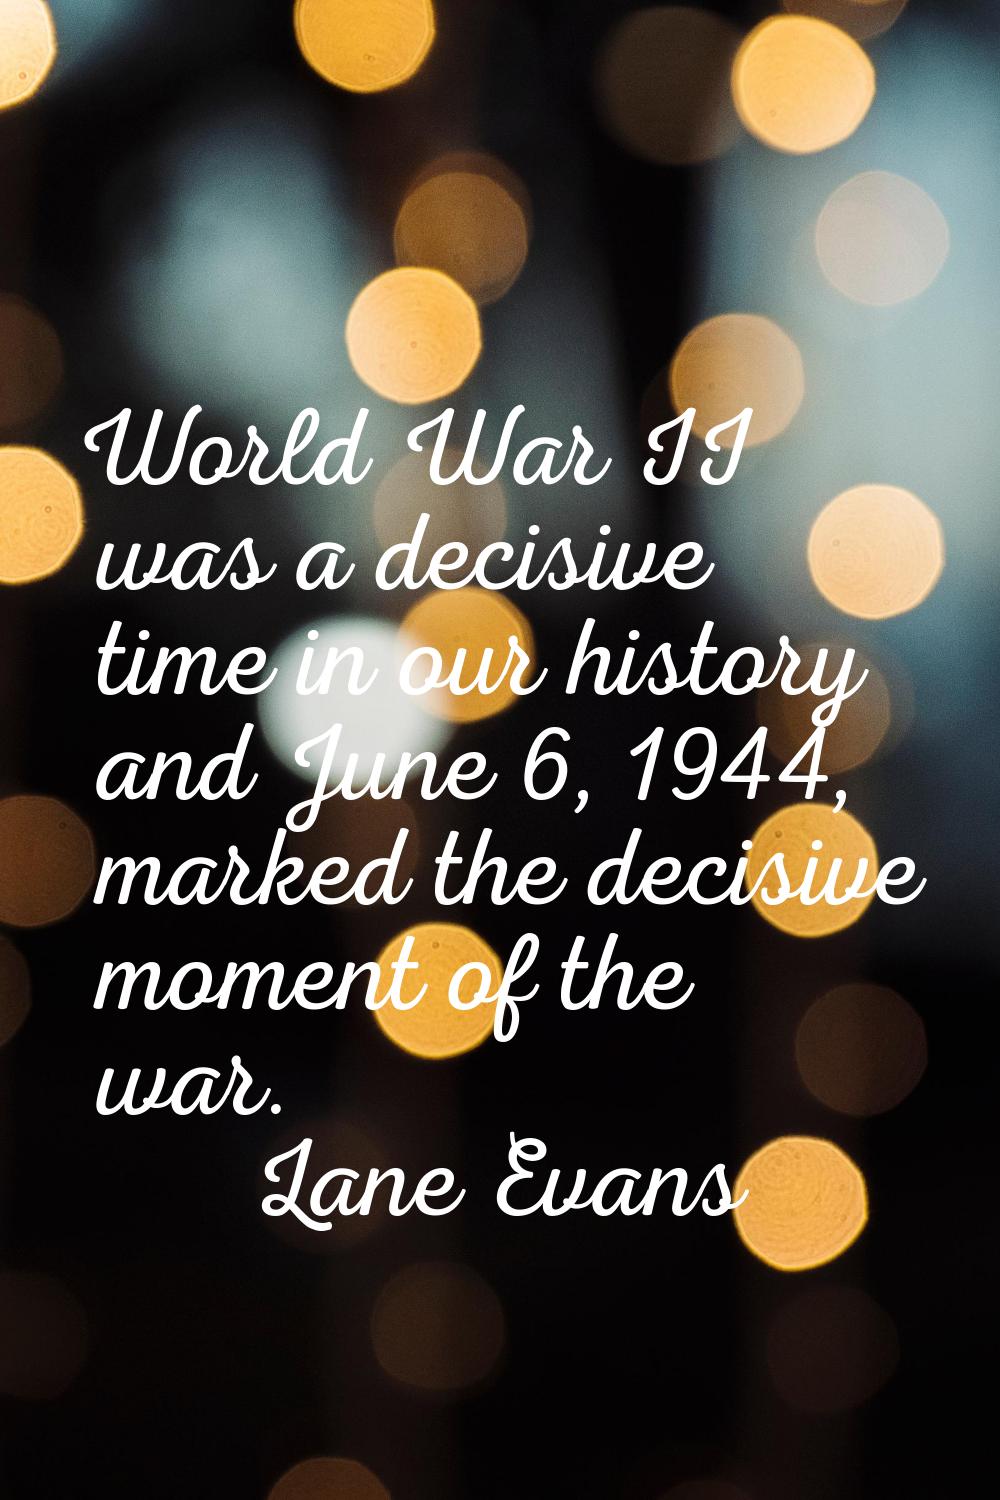 World War II was a decisive time in our history and June 6, 1944, marked the decisive moment of the